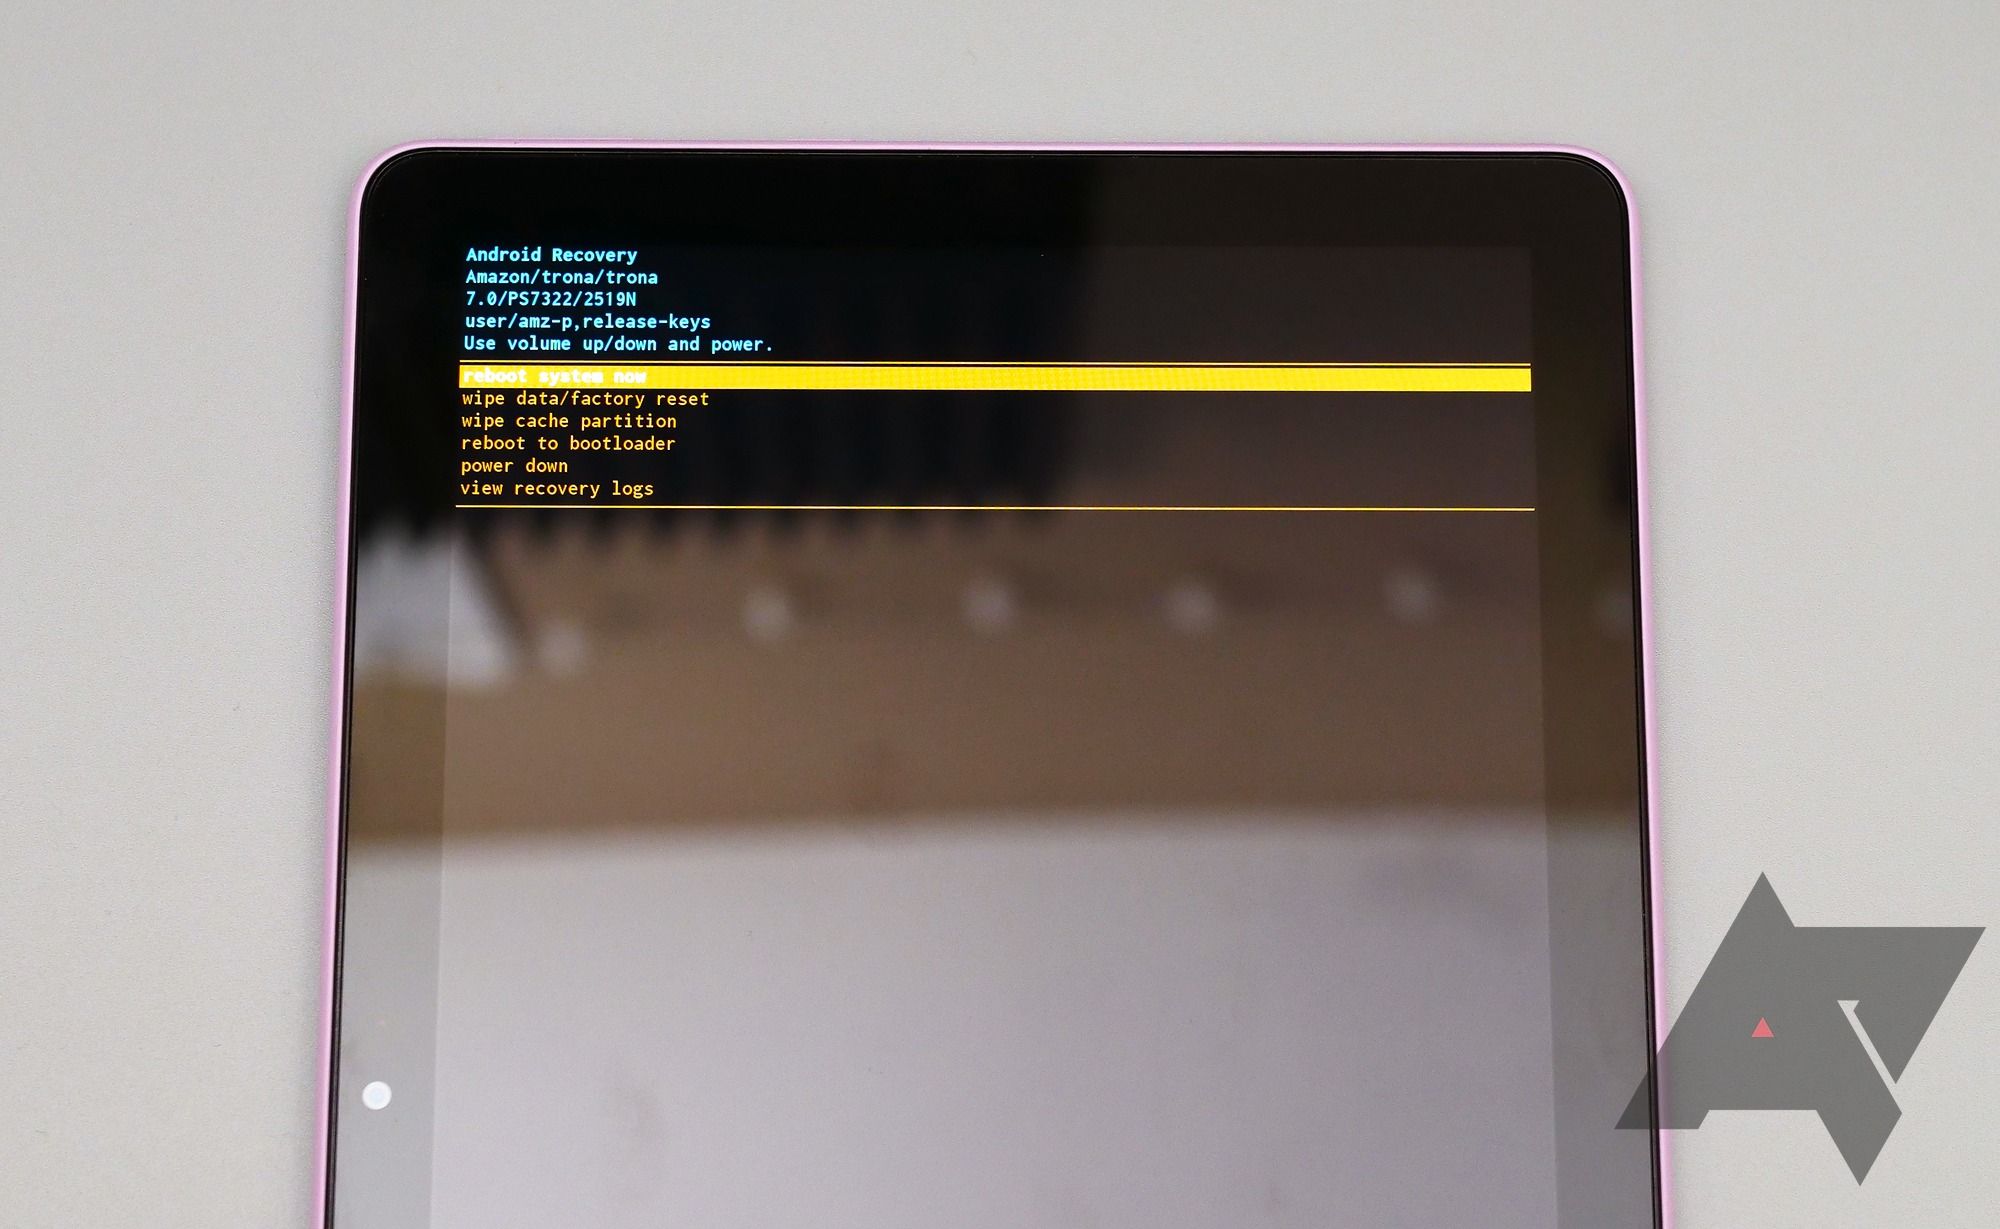 An Amazon Fire Tablet on the Android Recovery screen to clear cache.